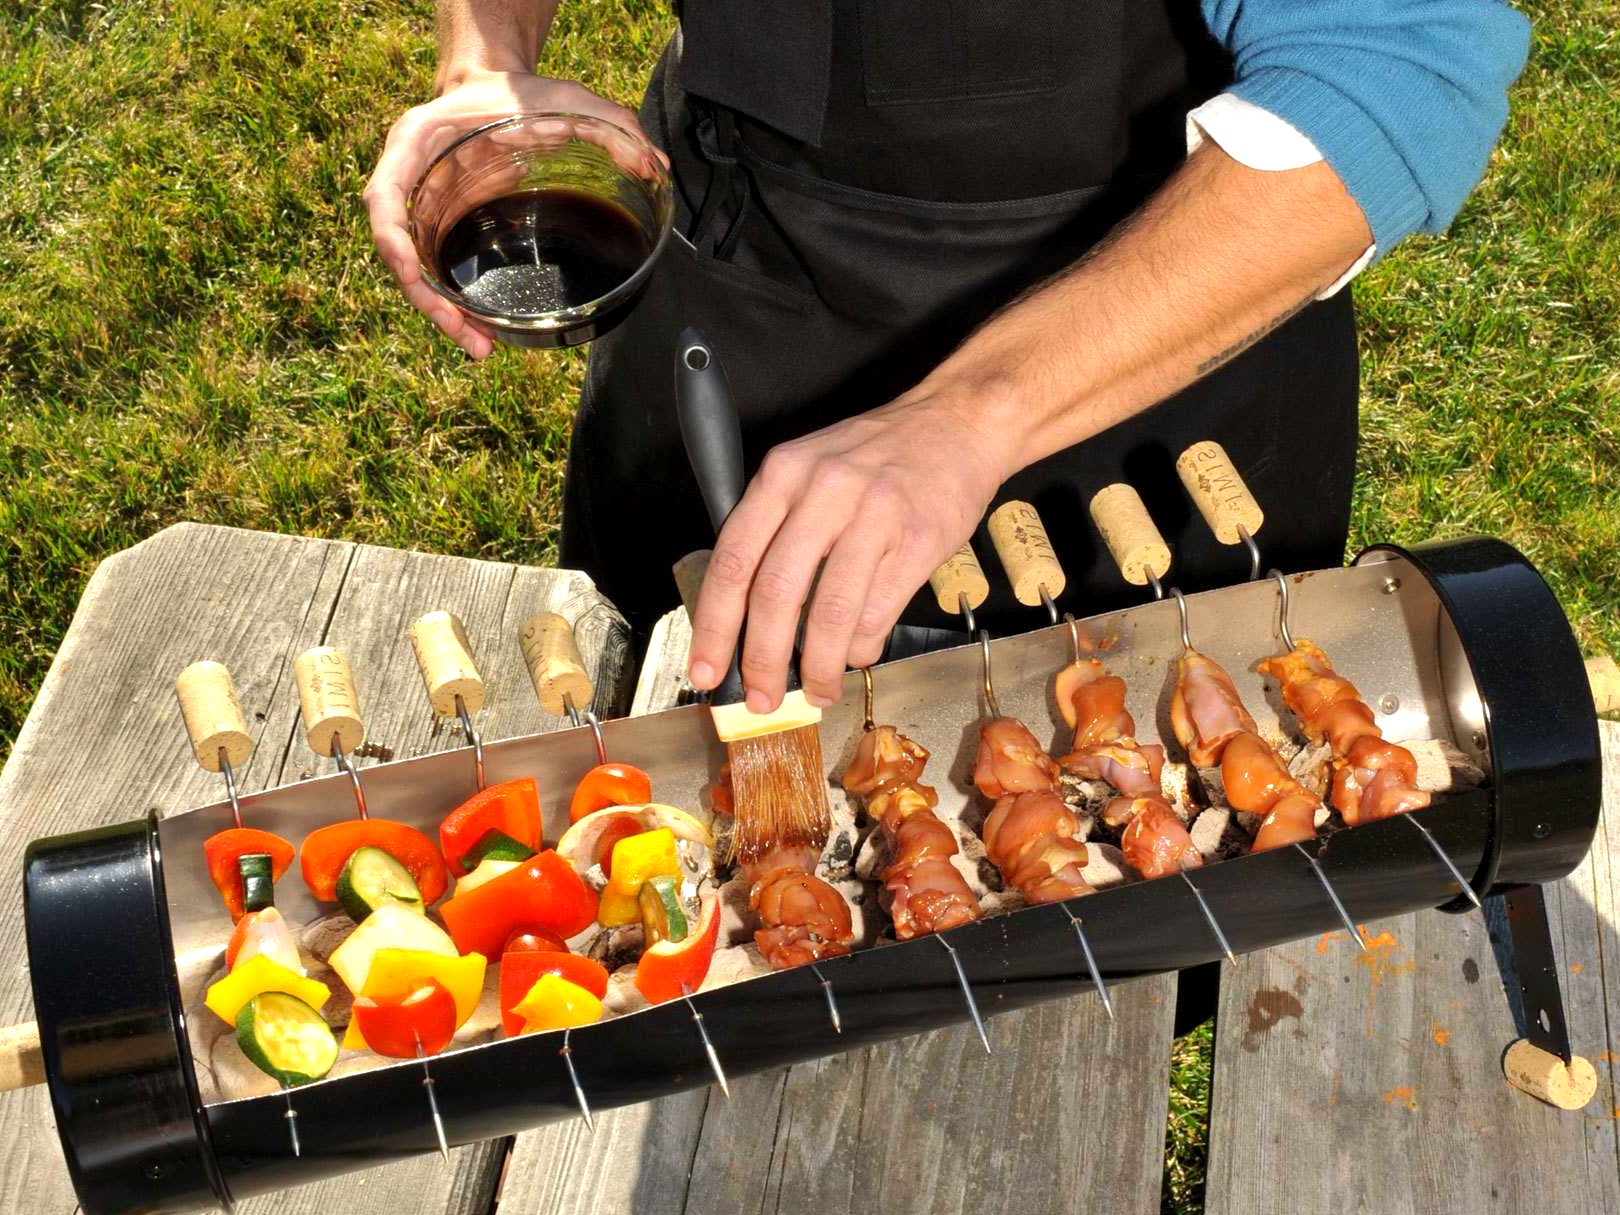 15 Unbelievable Diy Barbecue Initiatives You Can Construct In Your Yard